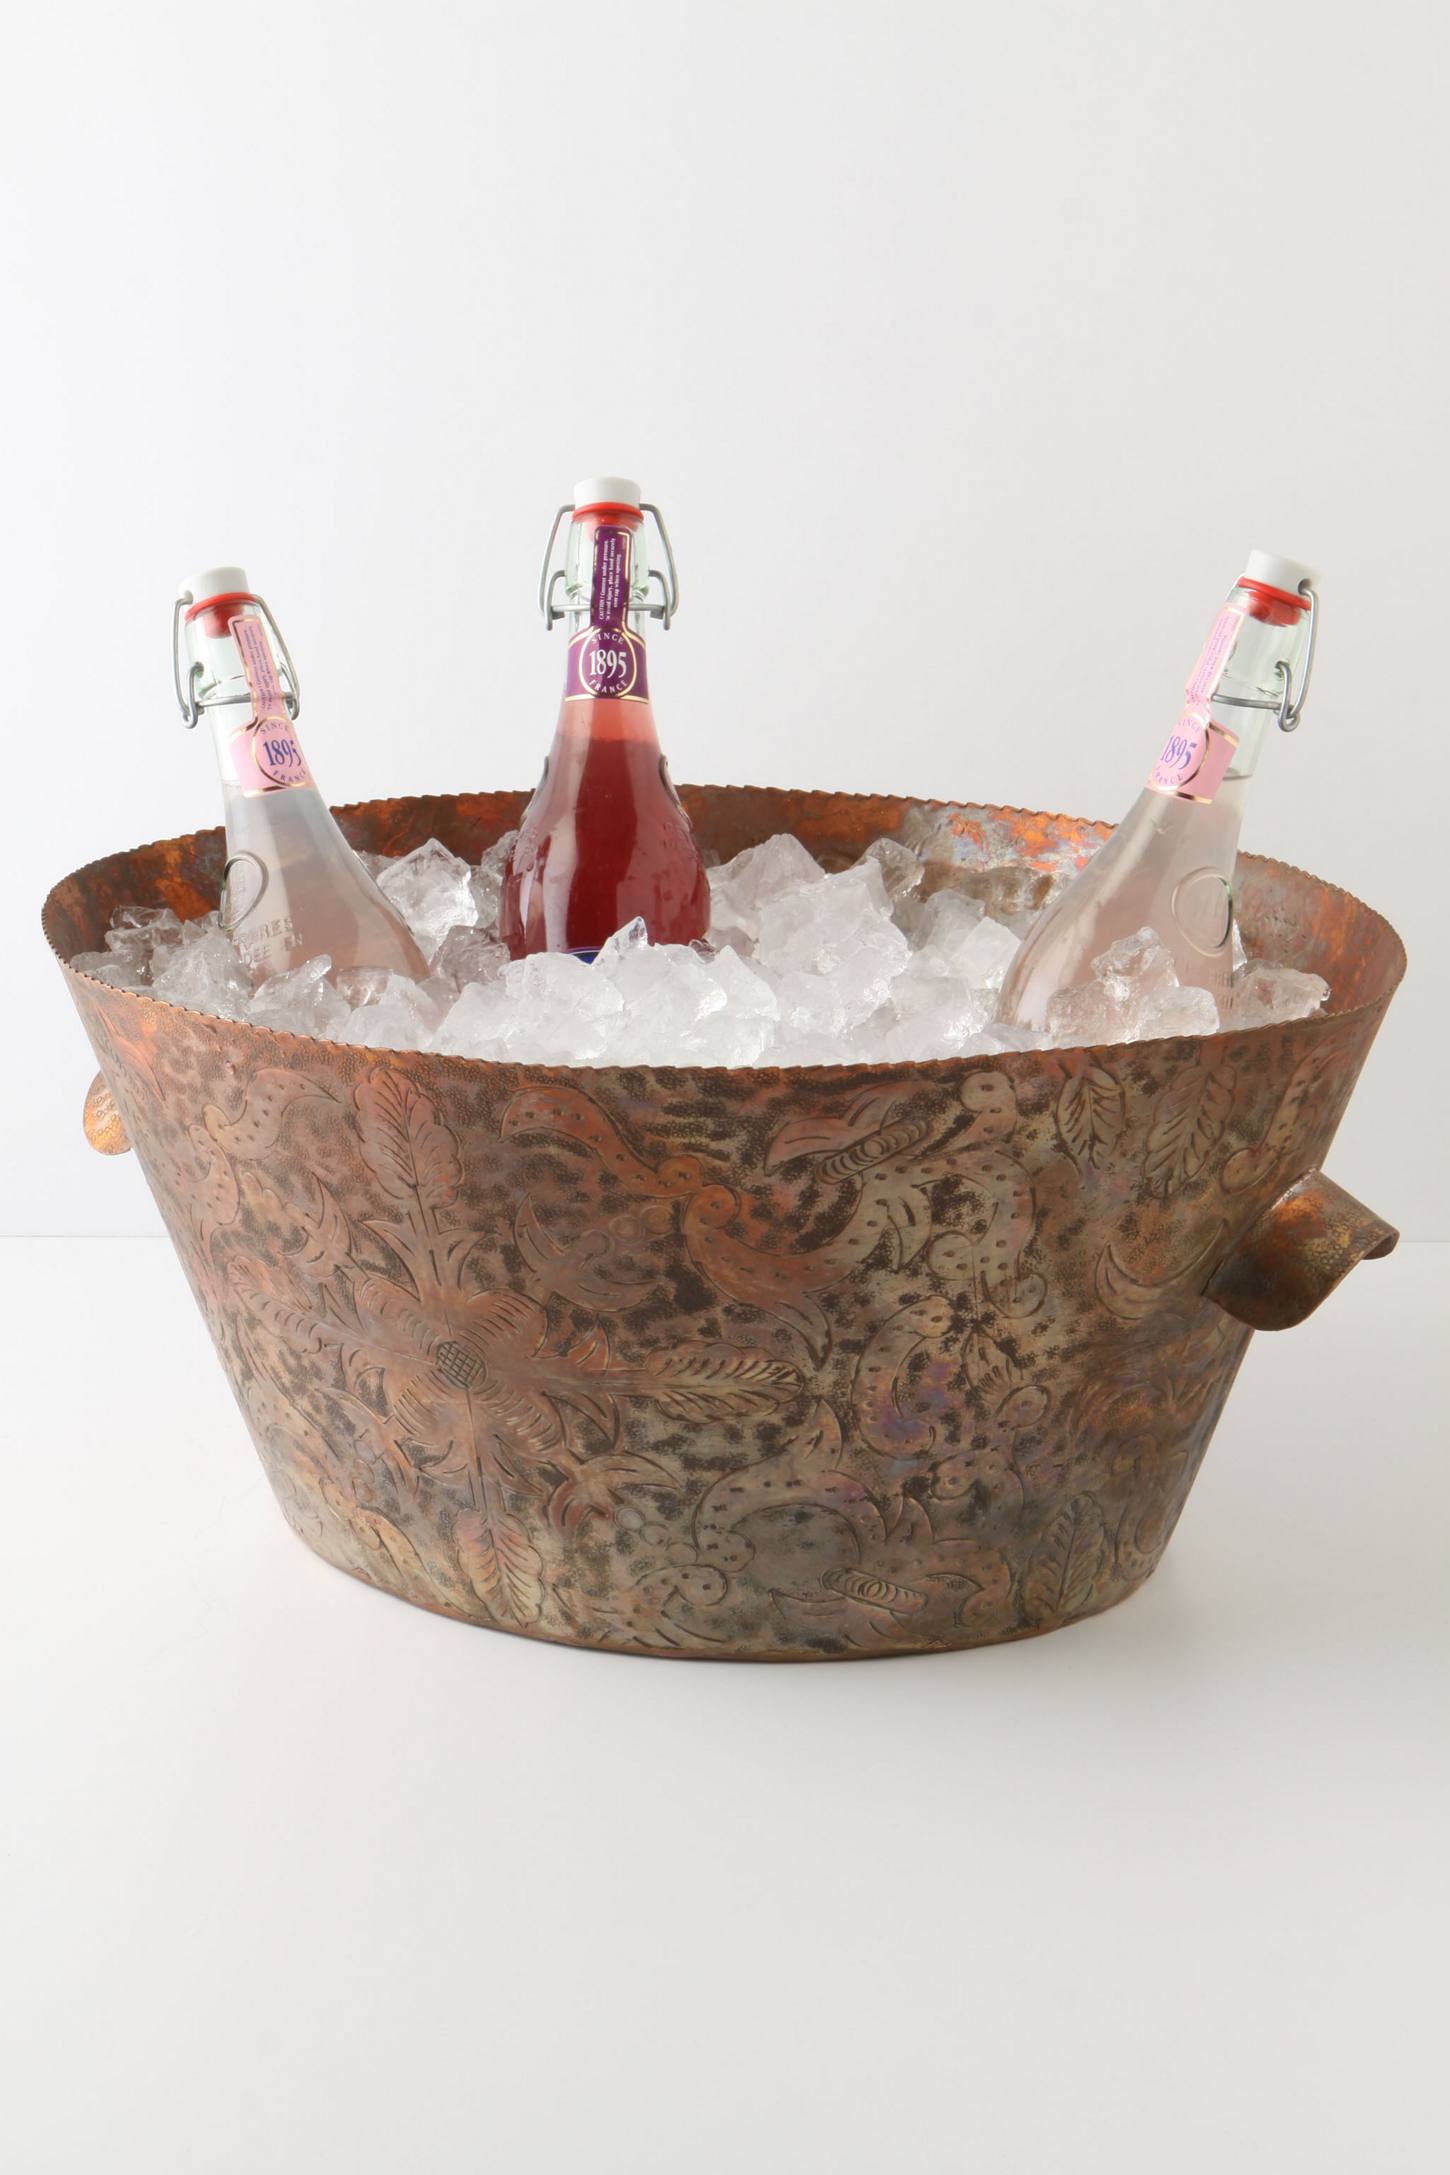 Copper party bucket with ice and three bottles in it